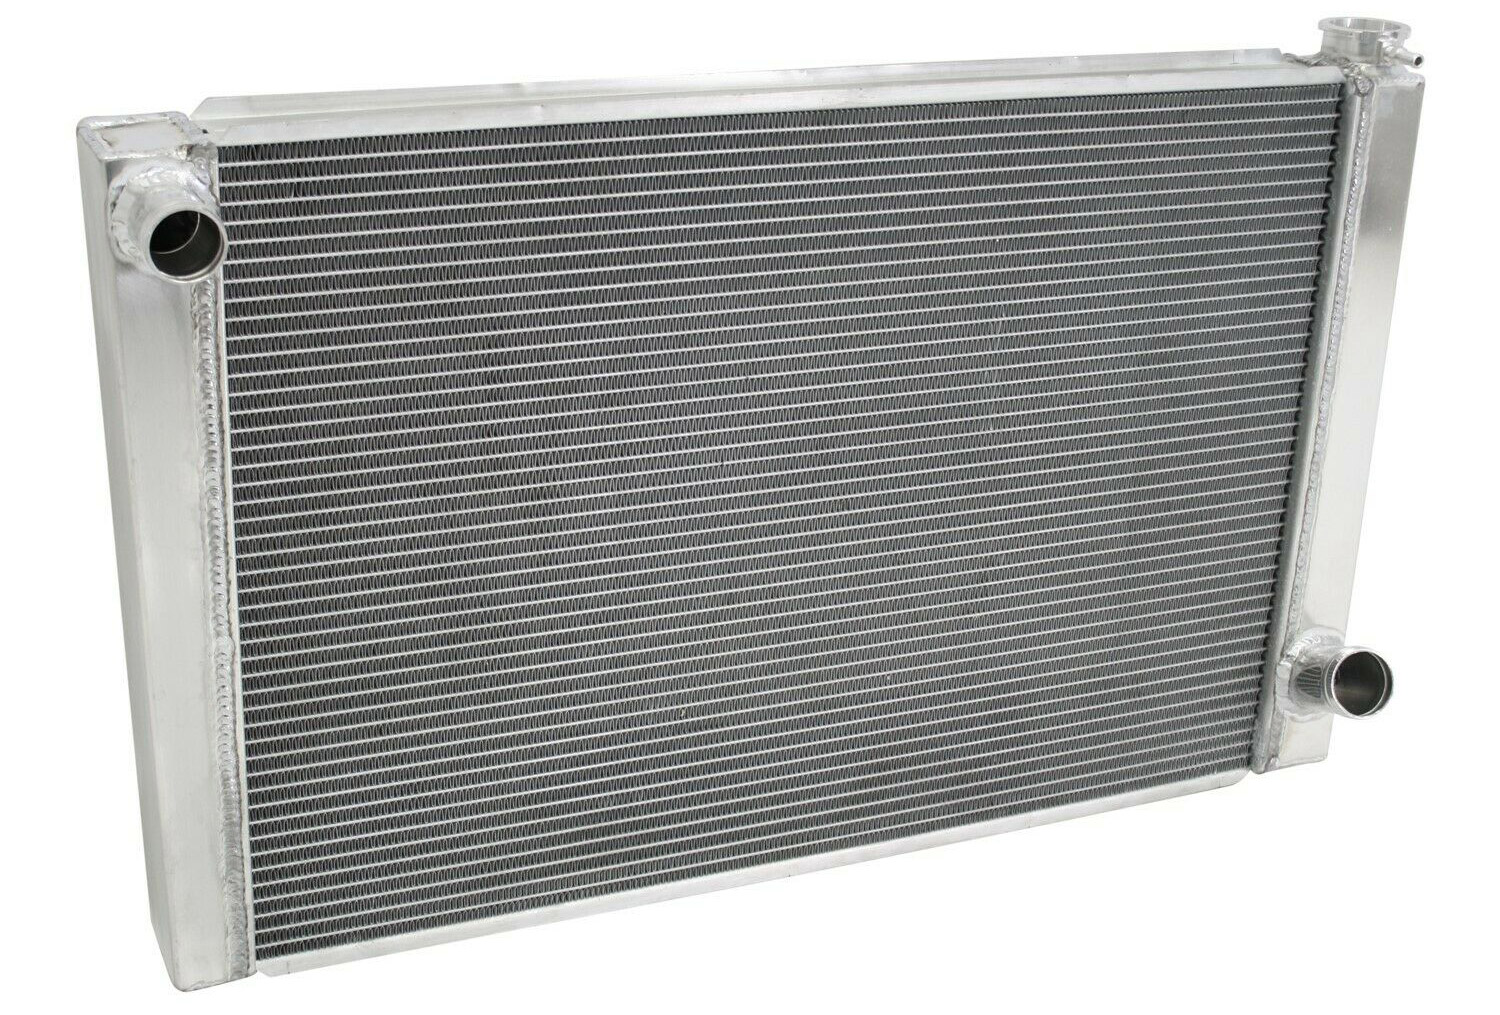 You can't tell from the outside, but this triple pass radiator provides three passages for the fluid to cool down.